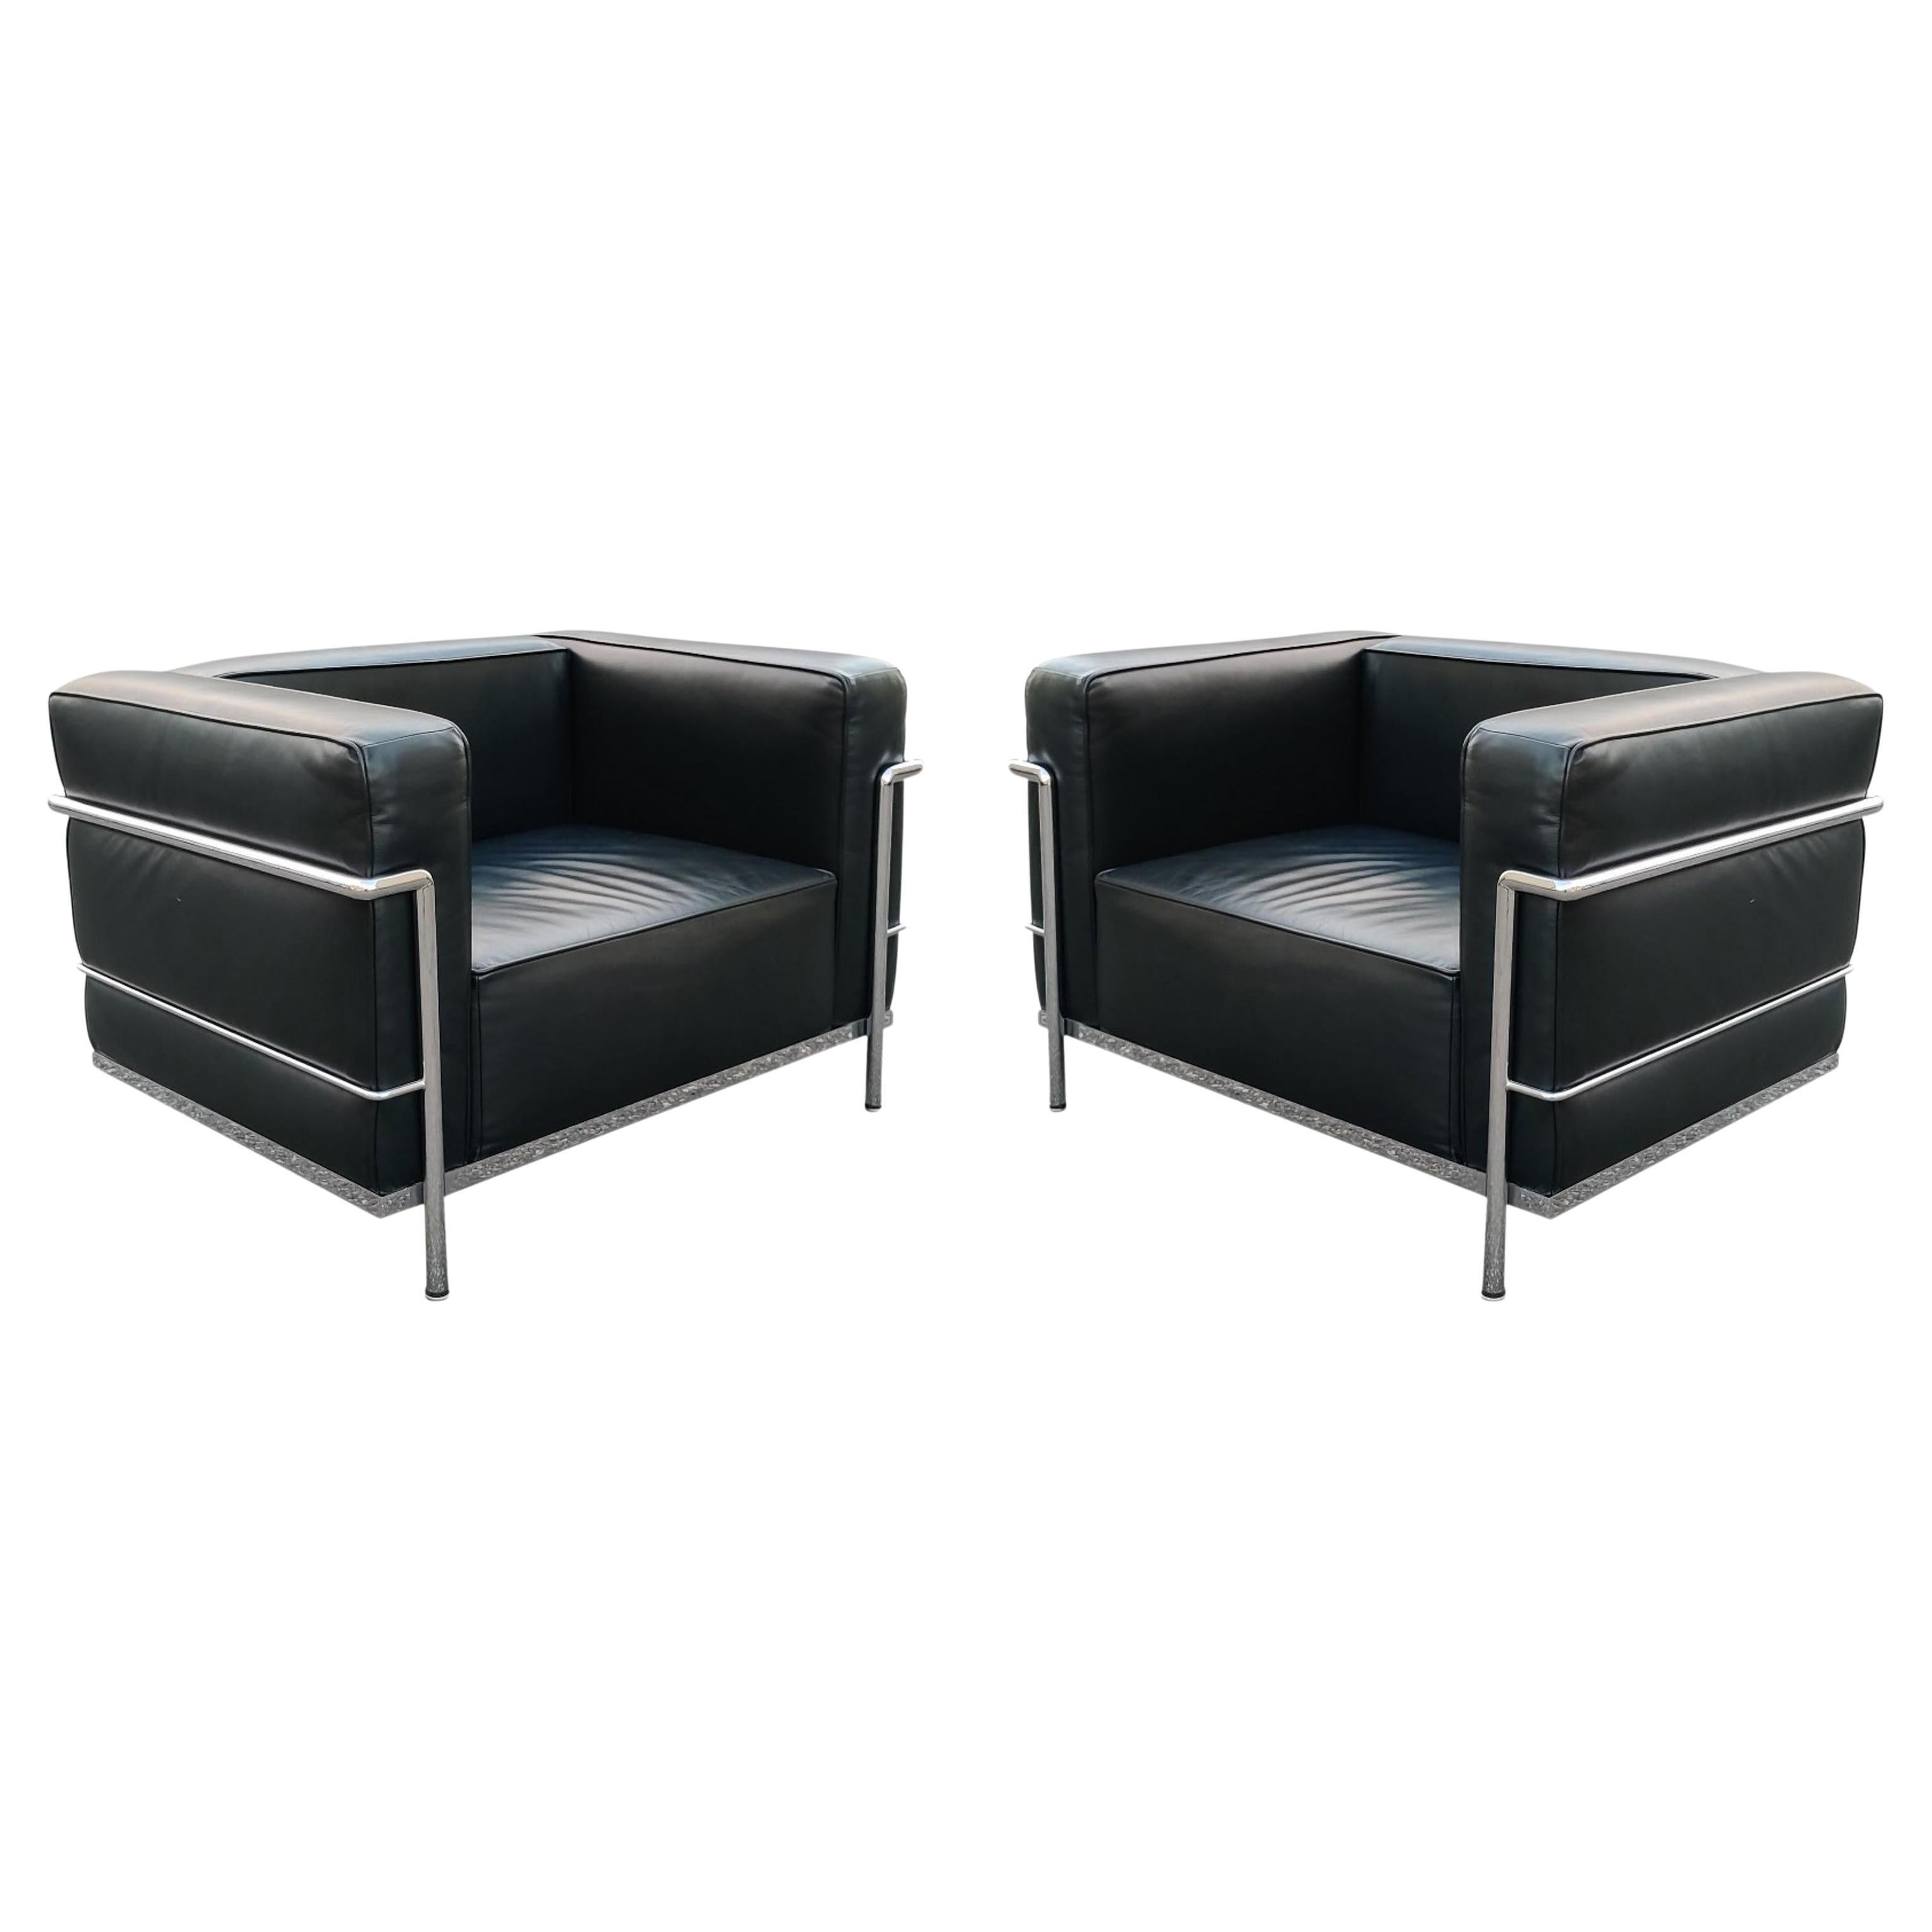 Pair of Gordon International Black Leather & Chromed Steel Club or Lounge Chairs For Sale